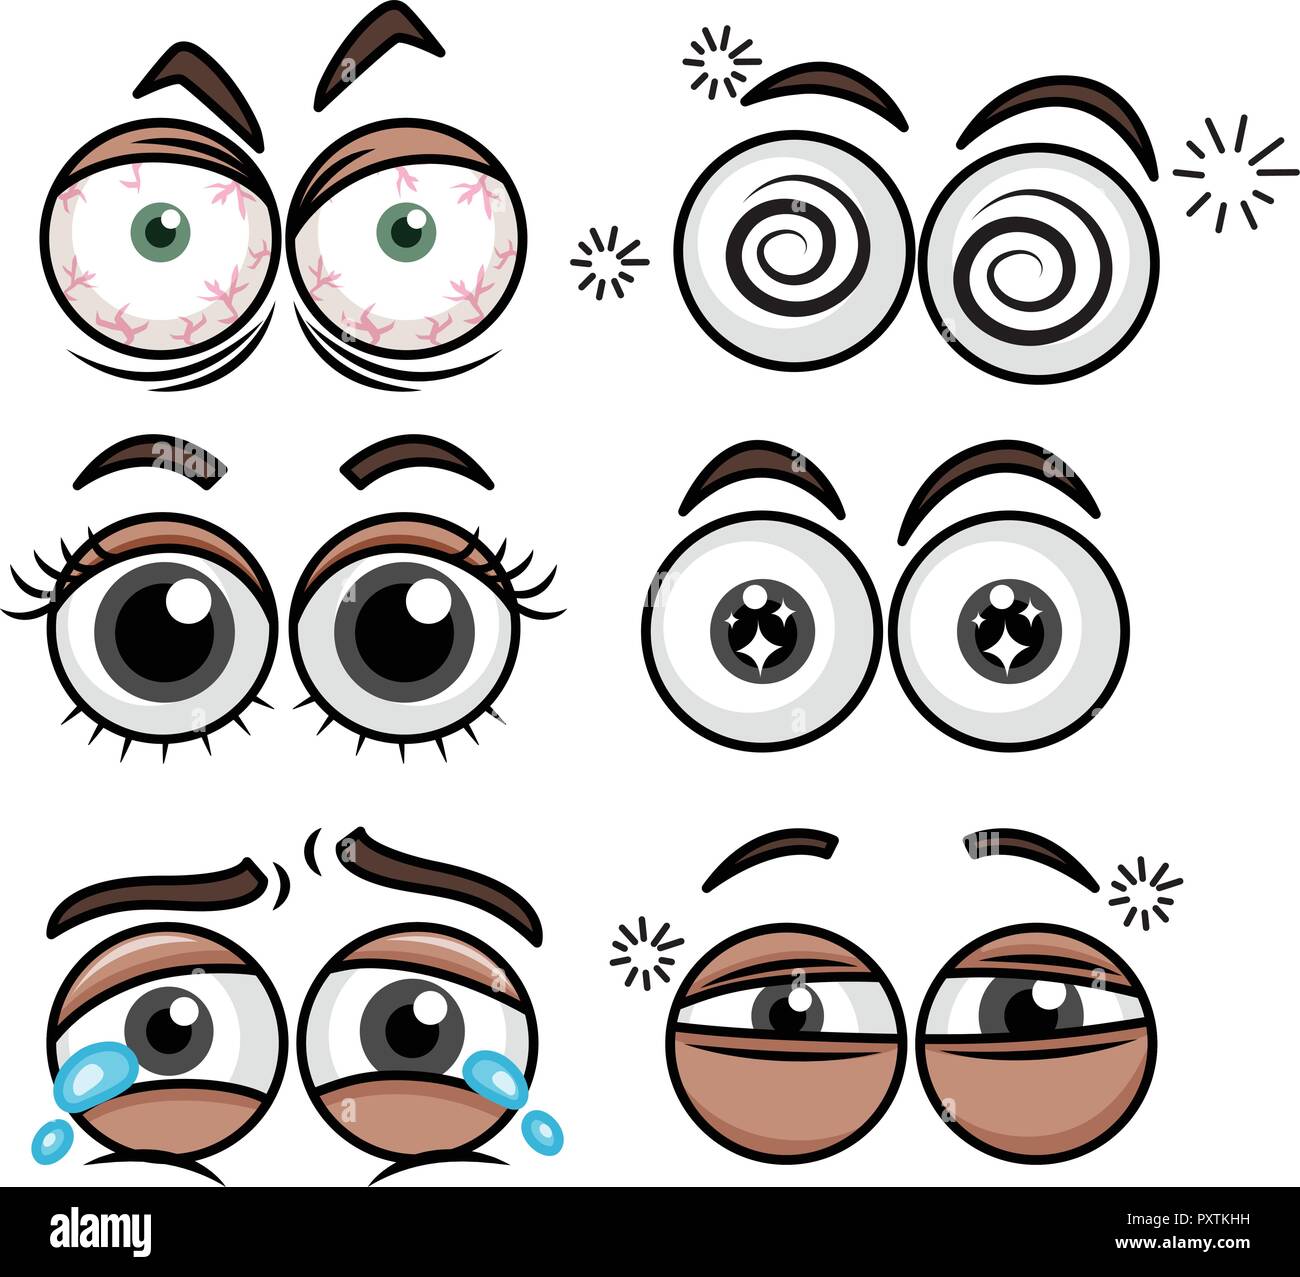 Six set of human eyes in different emotions illustration Stock Vector